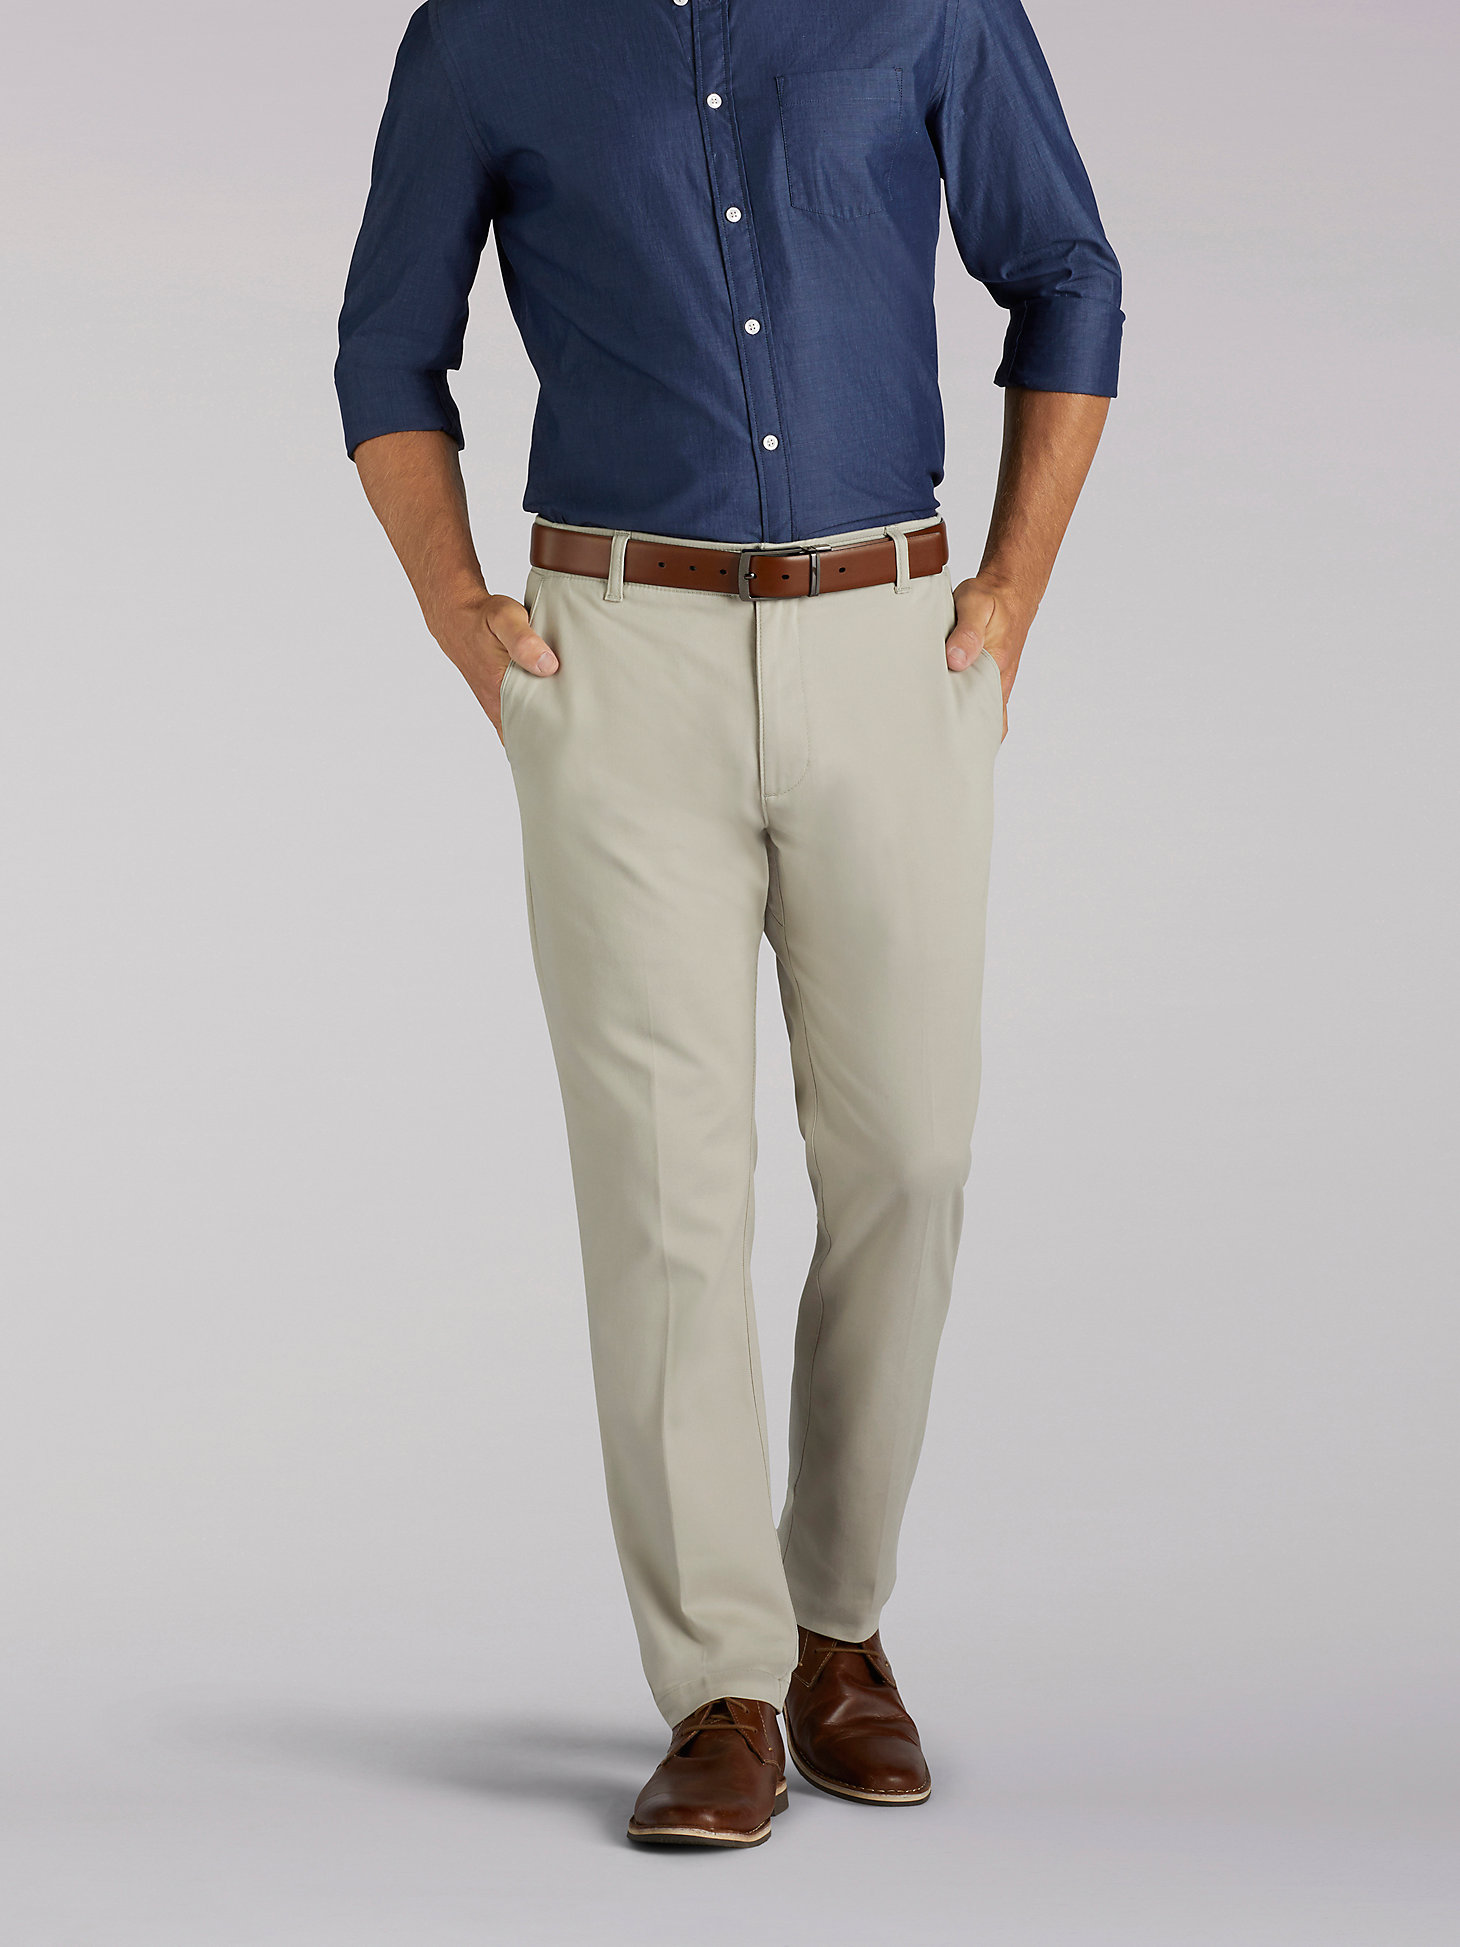 Men’s Extreme Comfort Relaxed Fit Pants (Big&Tall) in Dove main view